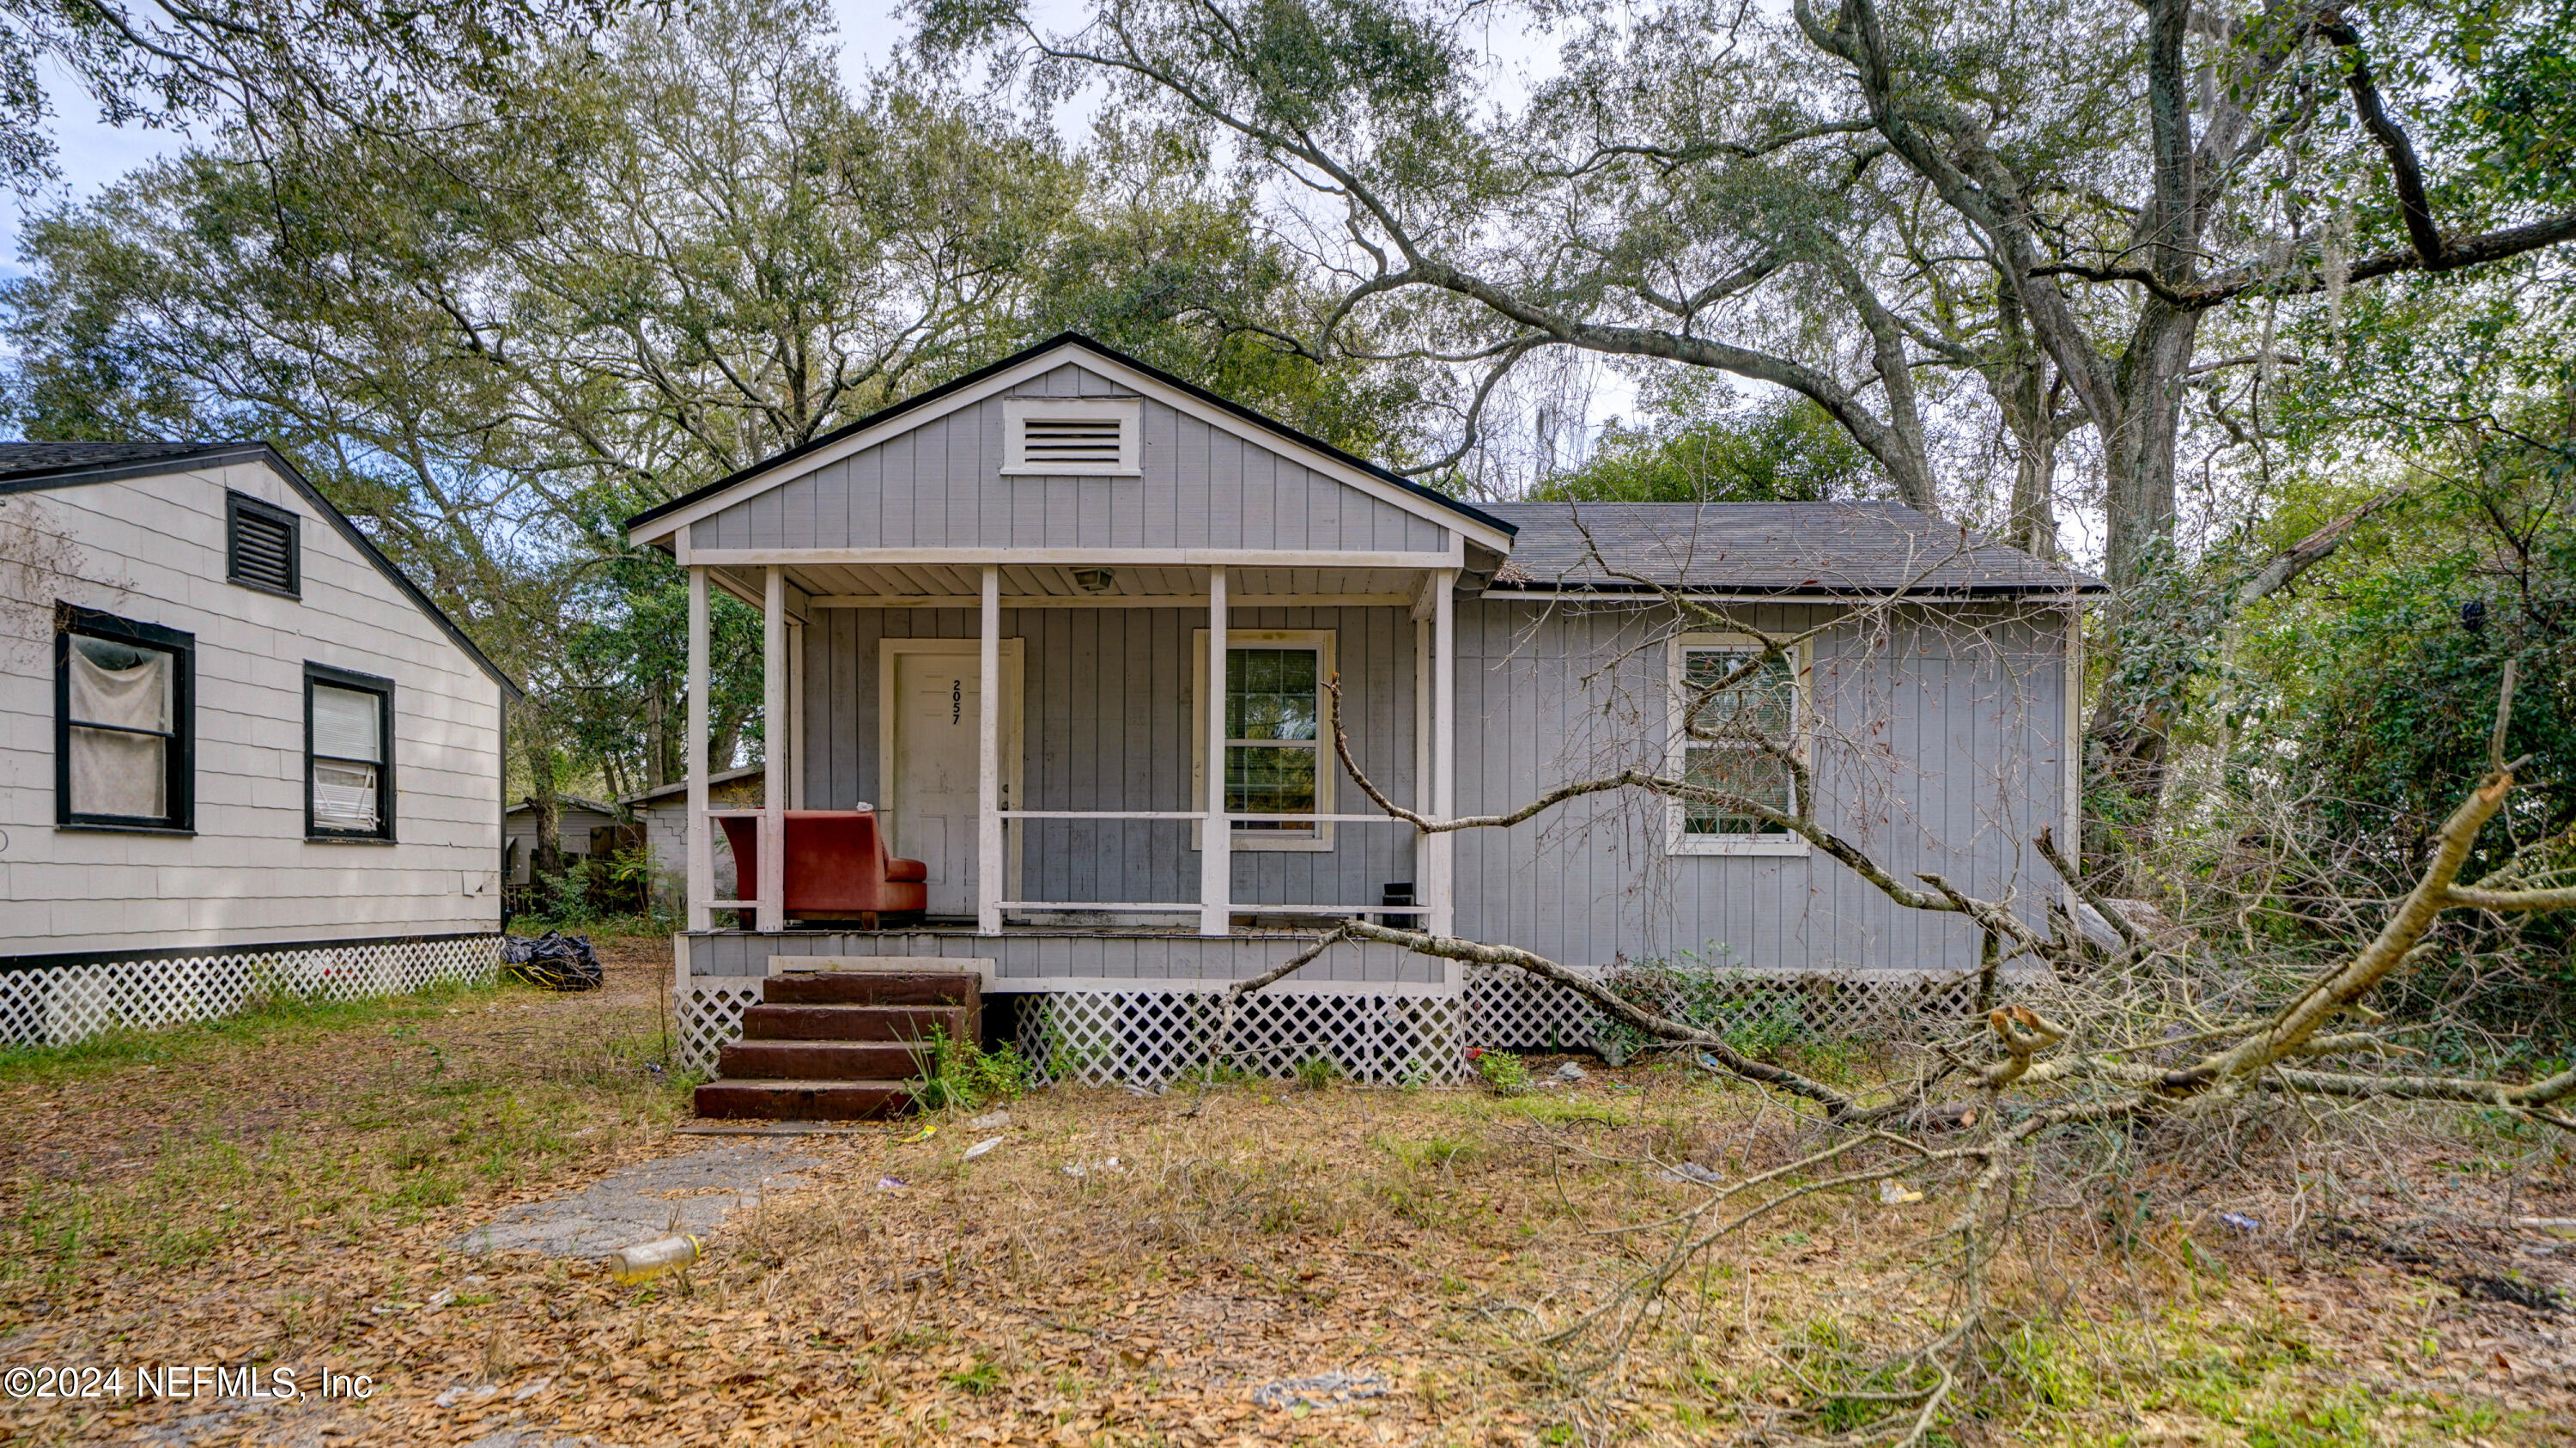 Jacksonville, FL home for sale located at 2057 Thelma Street, Jacksonville, FL 32206